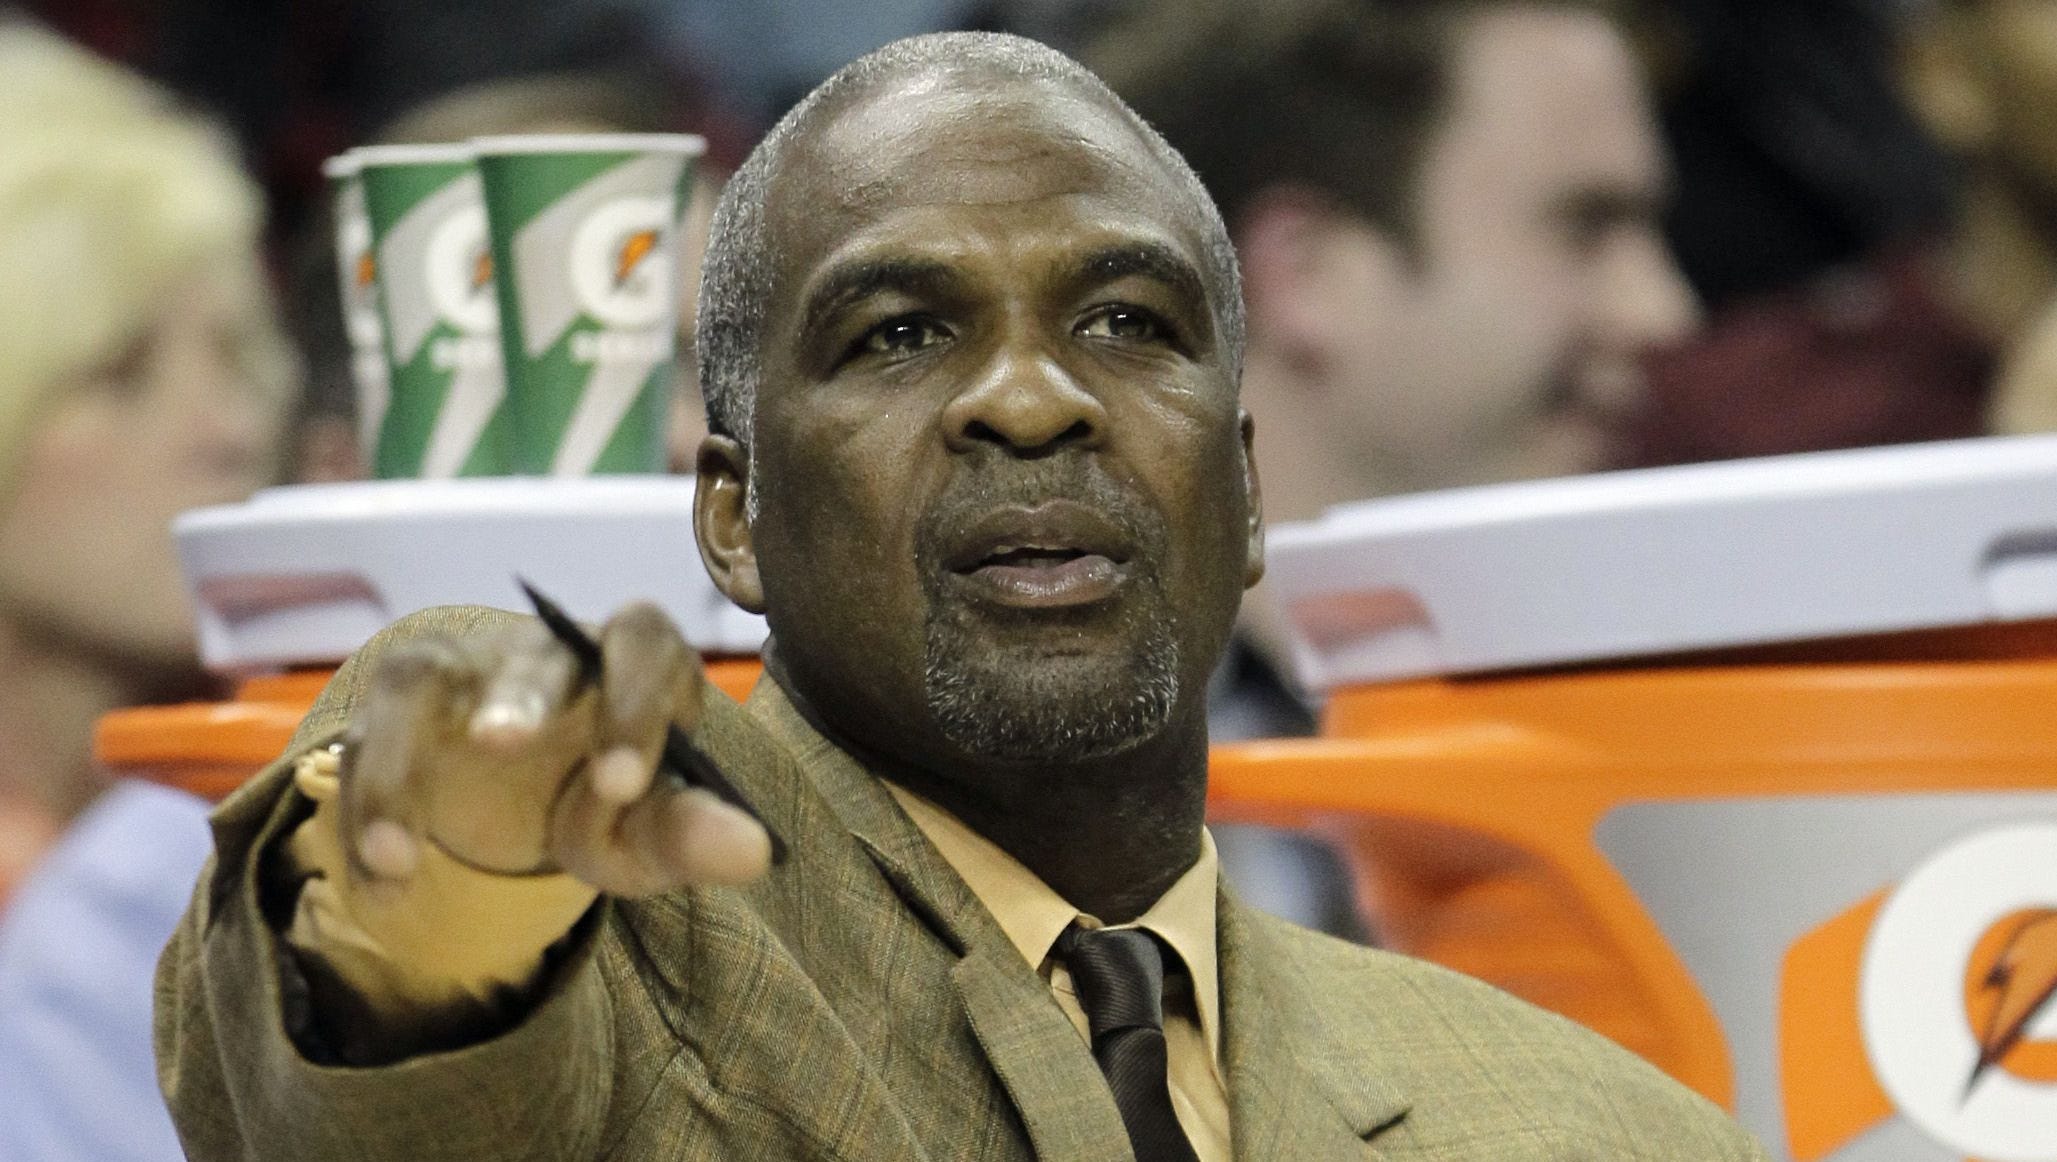 Charles Oakley: Charles Barkley needs to 'stop drinking at work'